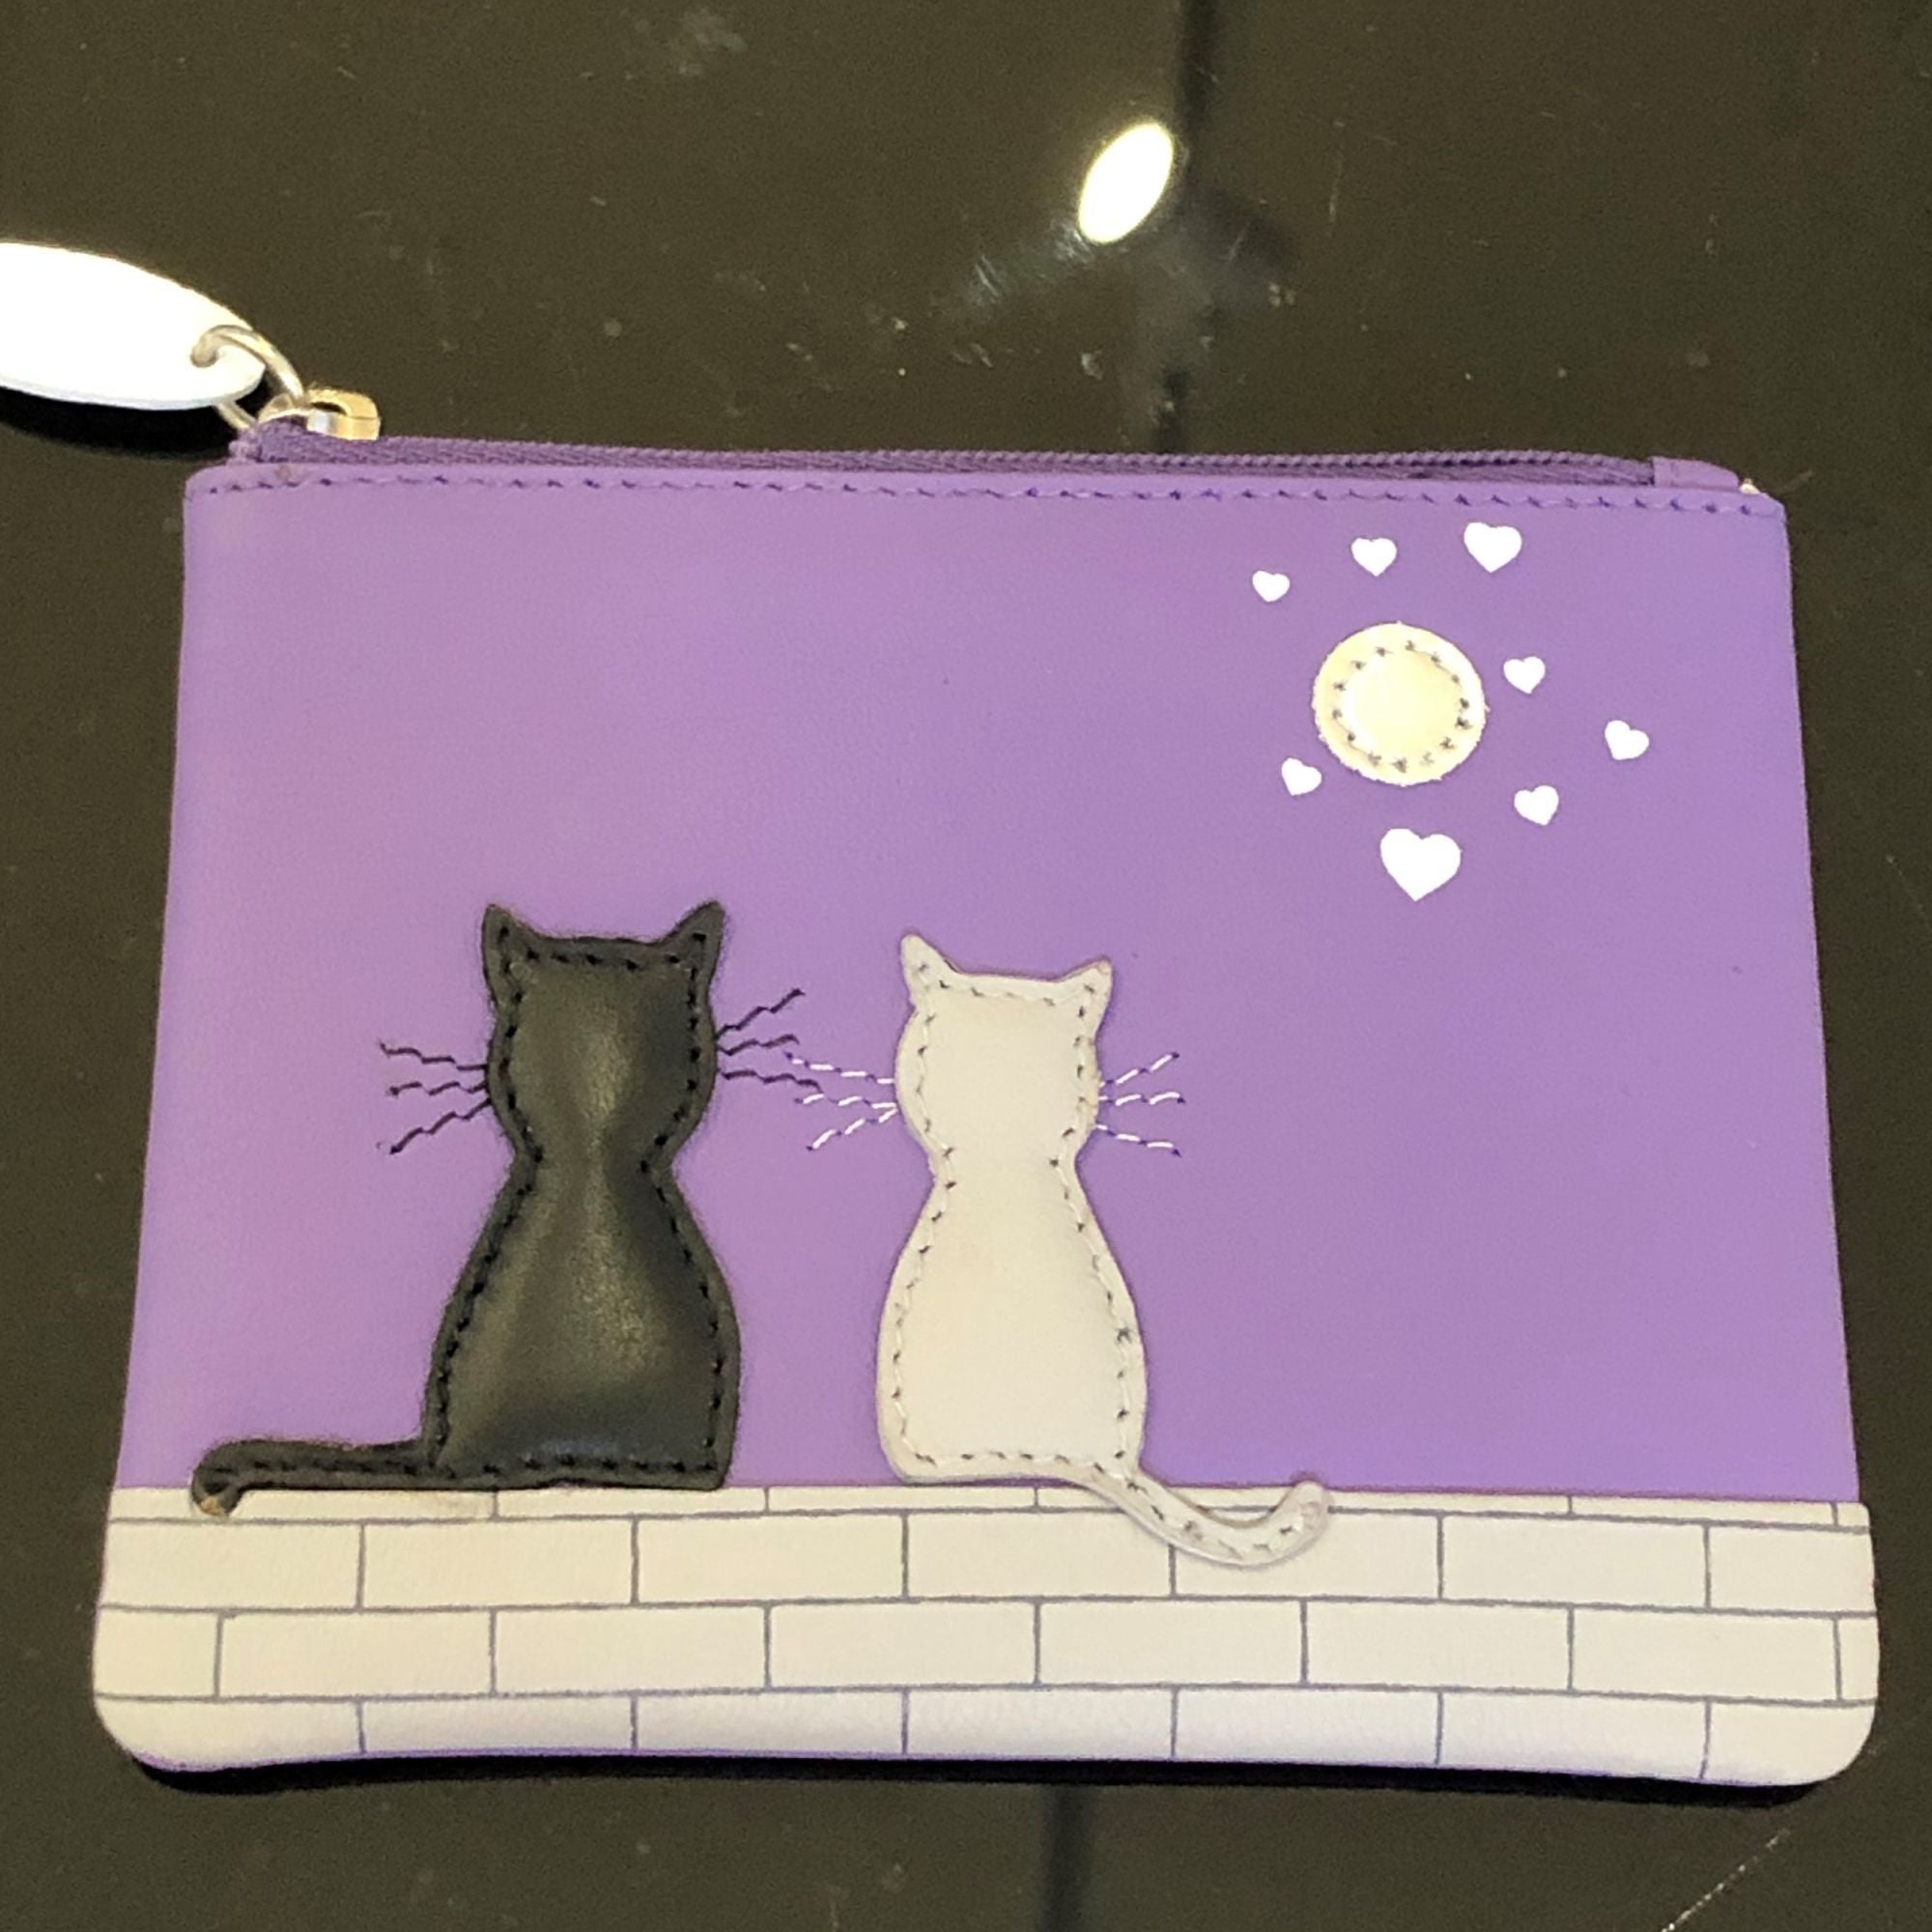 Midnight Cats Coin Purse